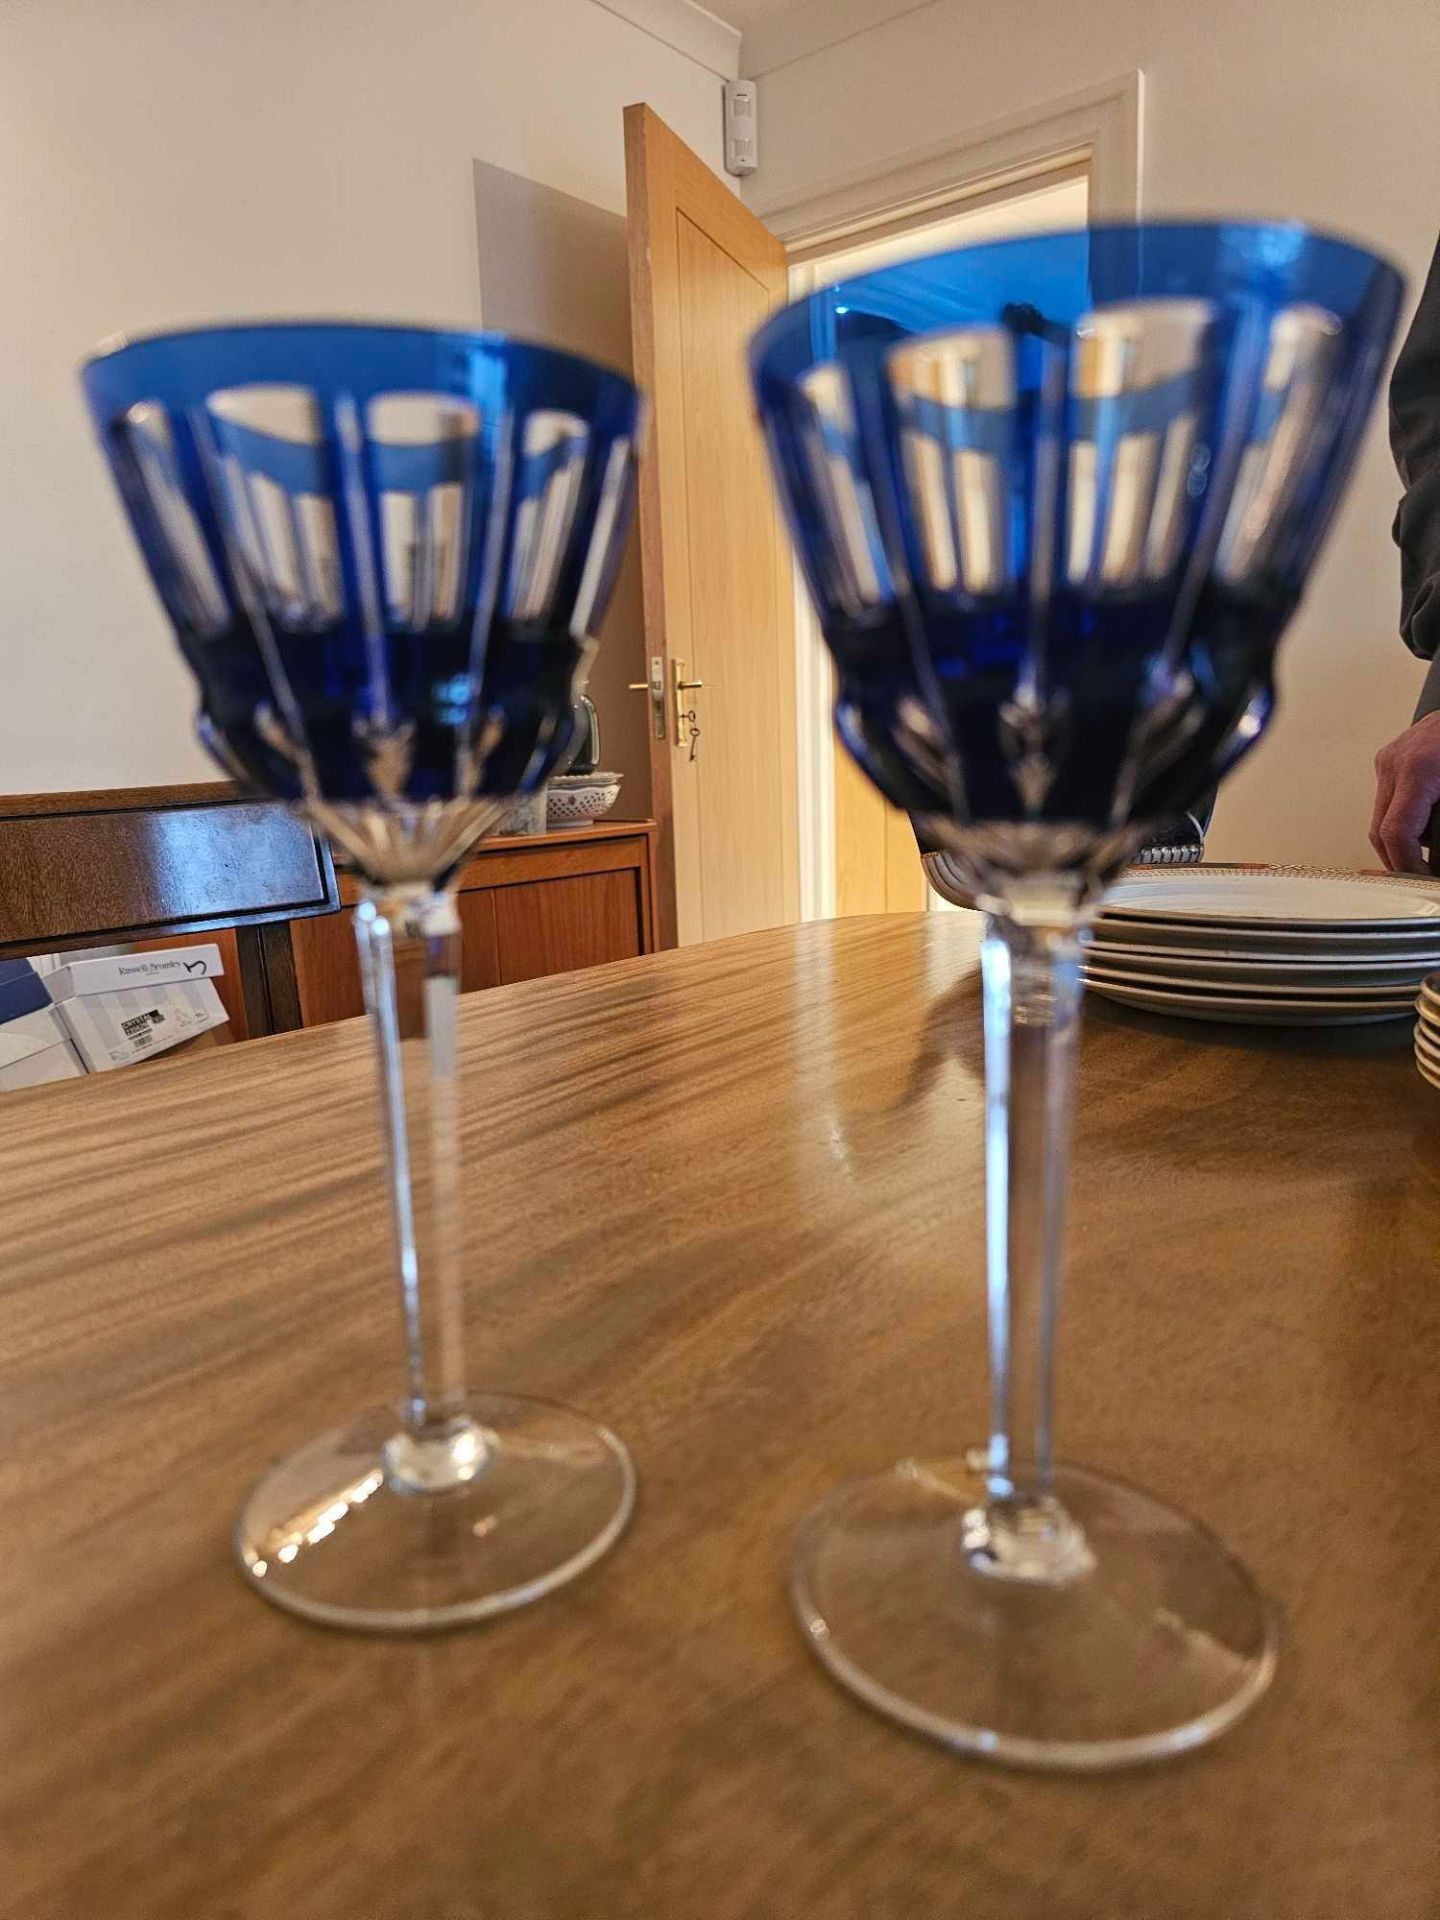 A Pair Of Bohemian Crystal Clear And Cobalt Goblets 18.5cm